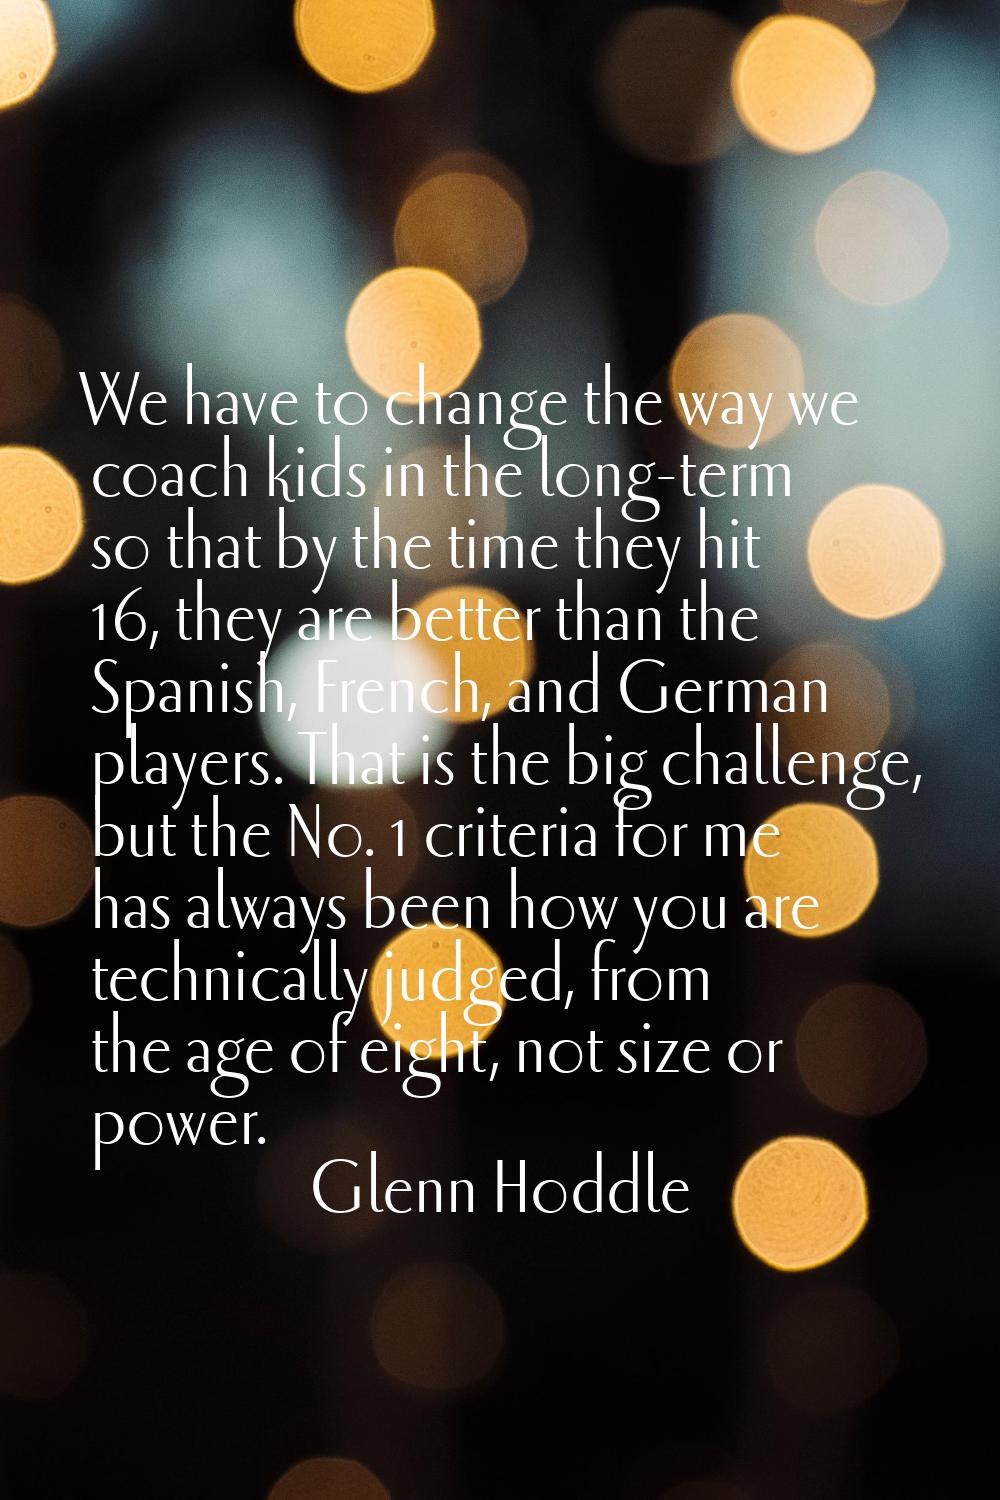 We have to change the way we coach kids in the long-term so that by the time they hit 16, they are 